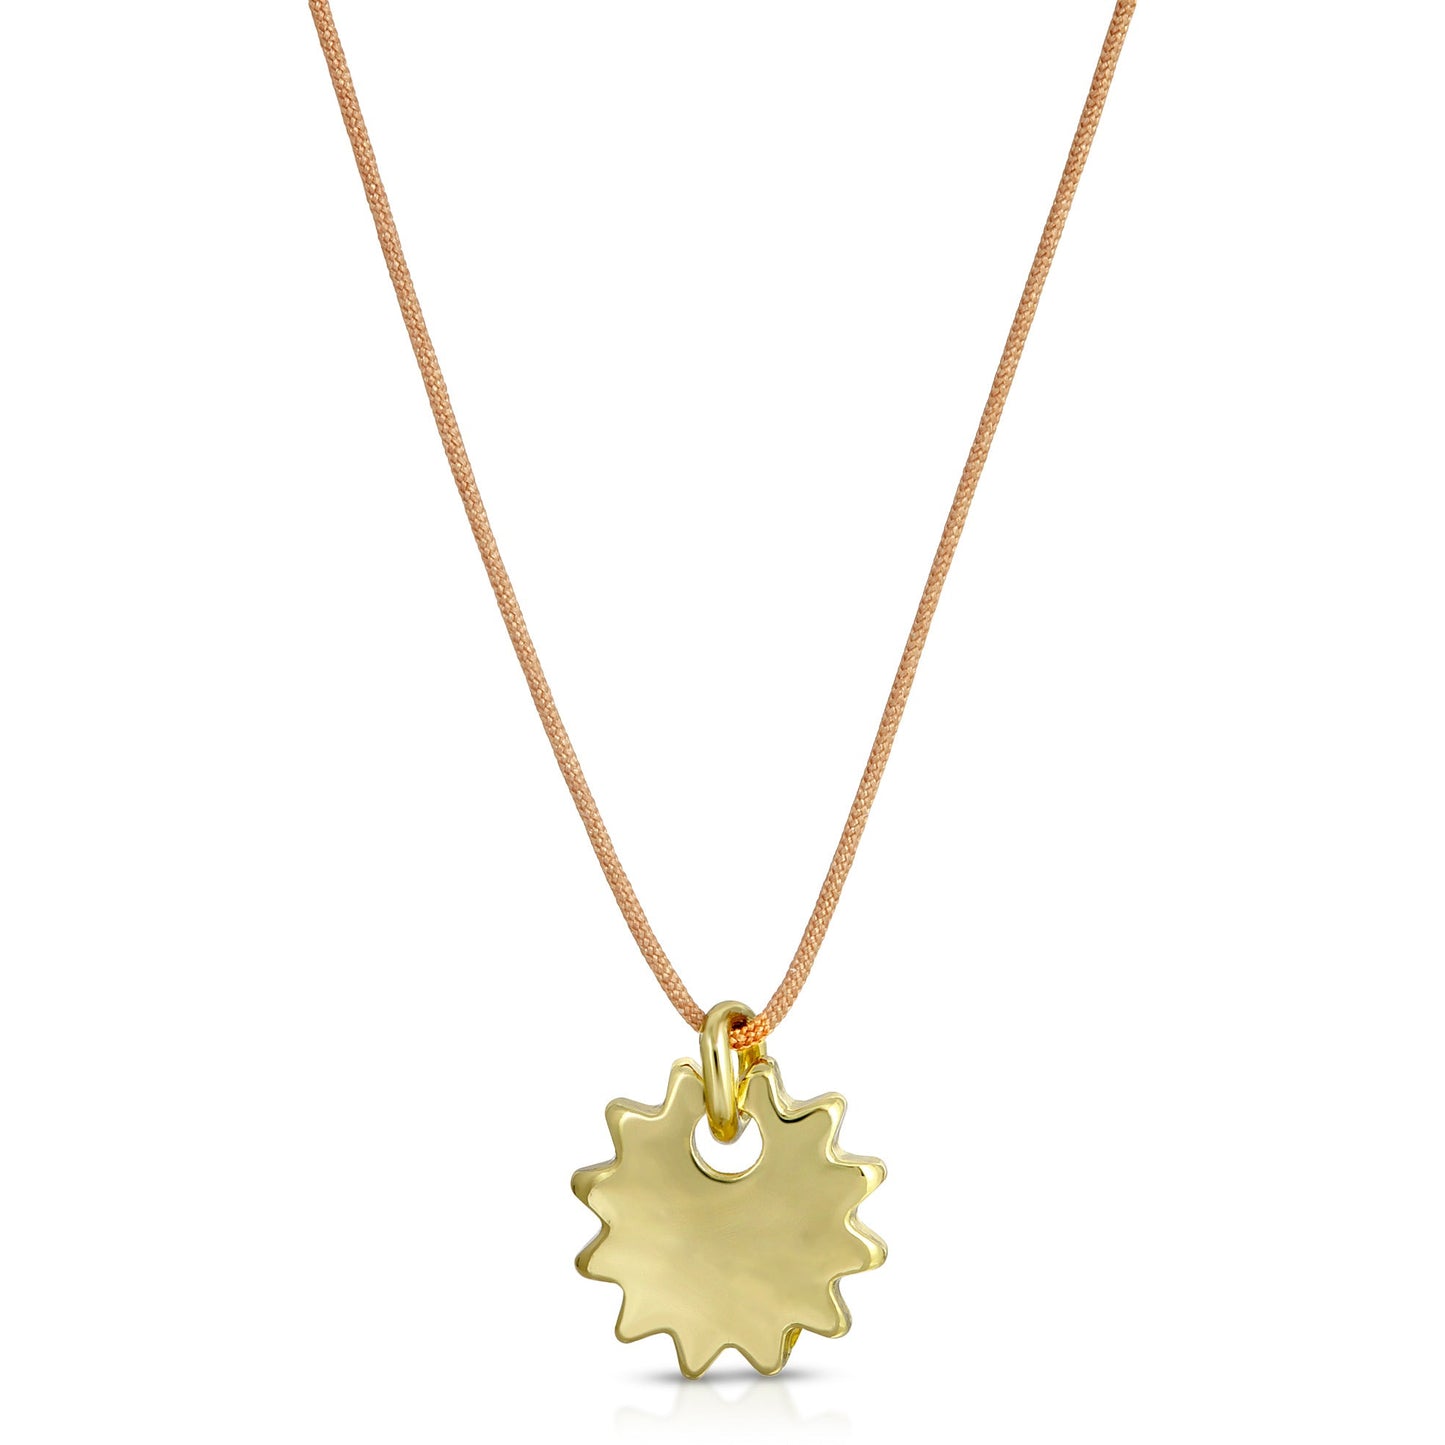 Sunshine of Happiness - Gold Sun Necklace